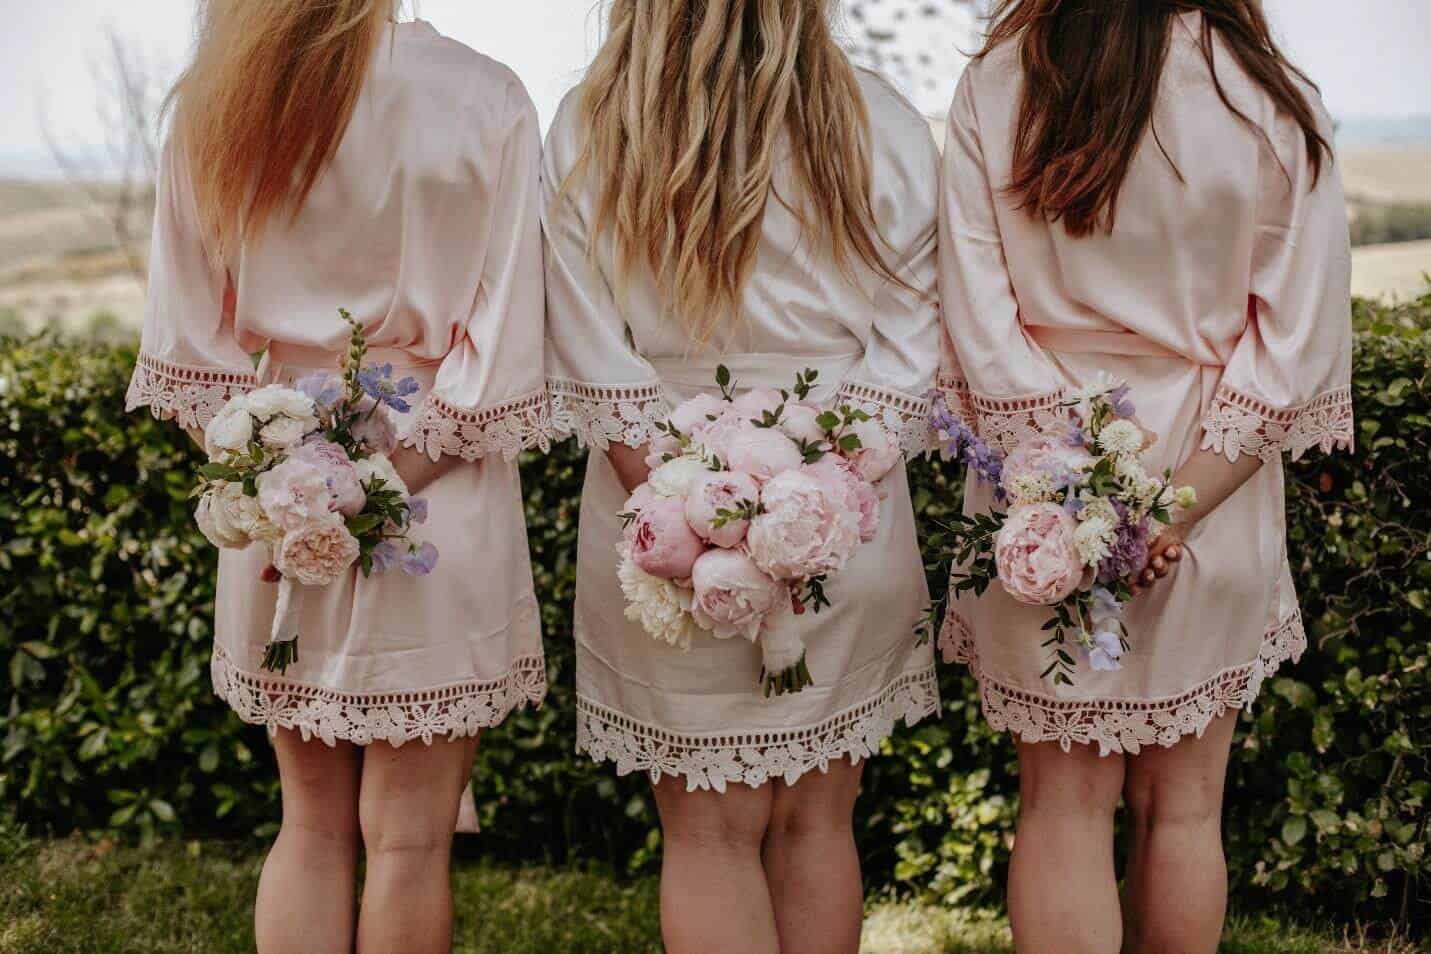 Bride and her girlfriends standing back with wedding dresses and buttercup flowers